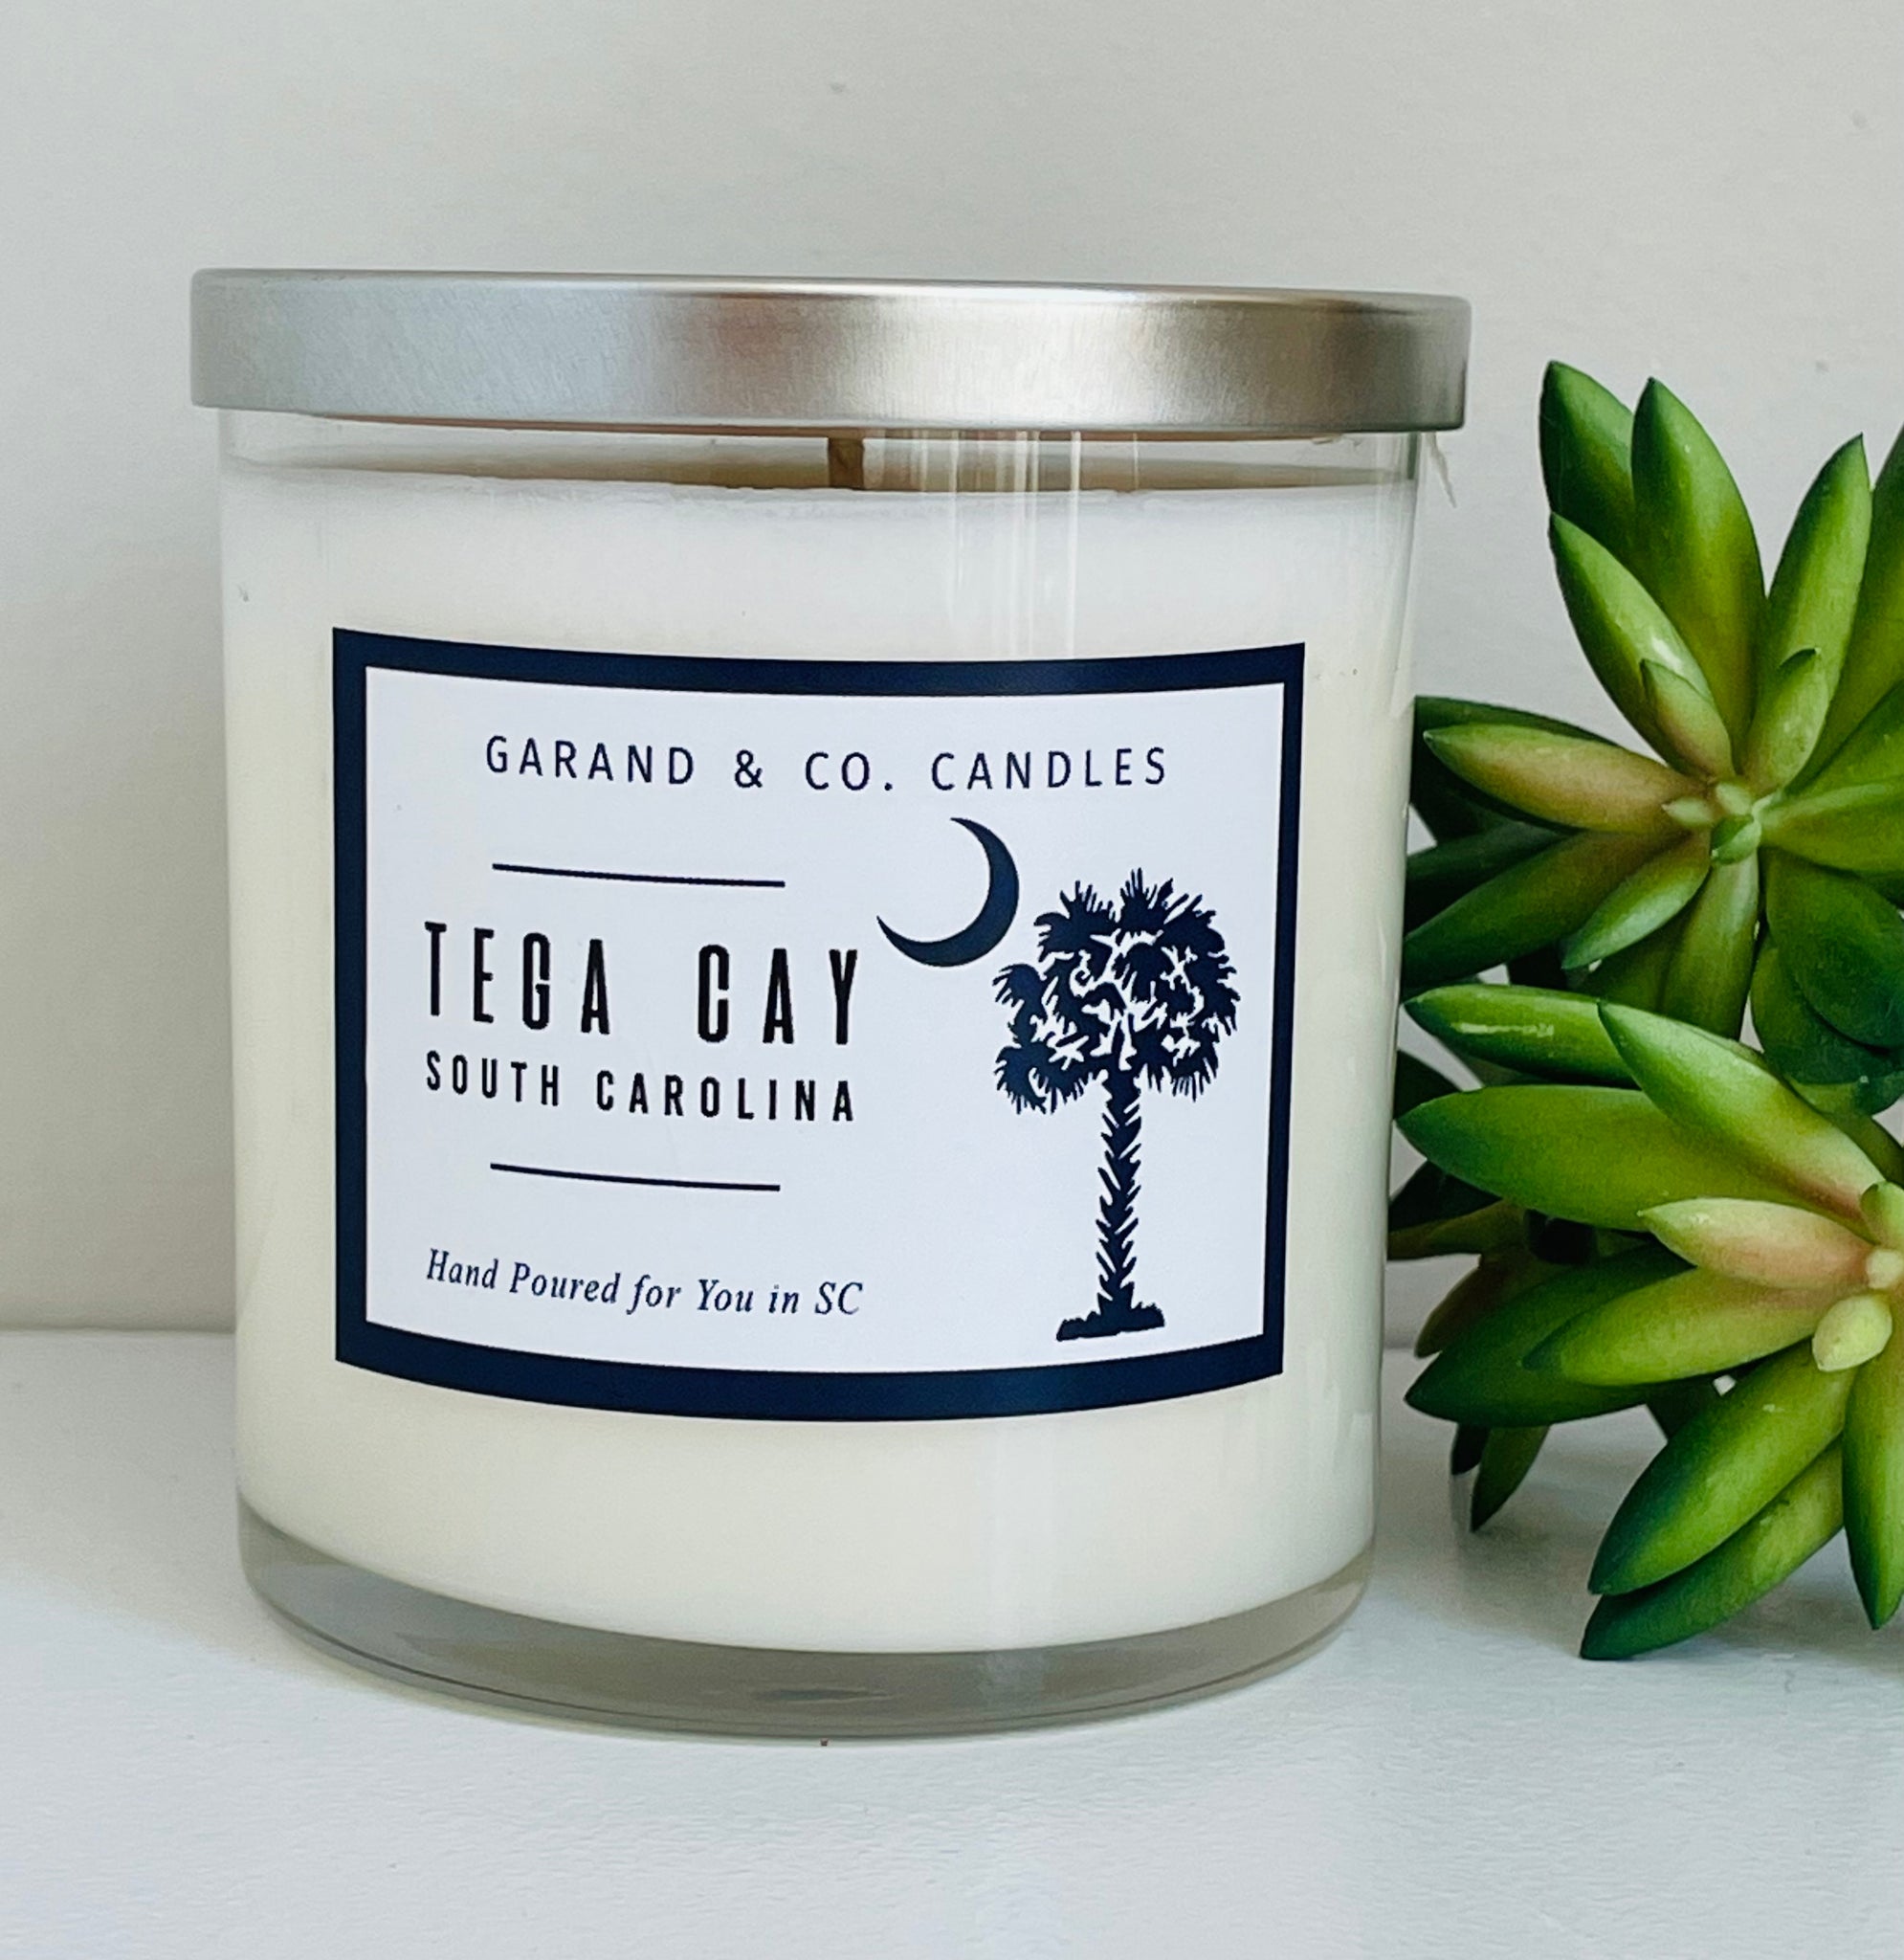 12 oz Clear Glass Jar Candle -  Tega Cay, SC Palm and Crest